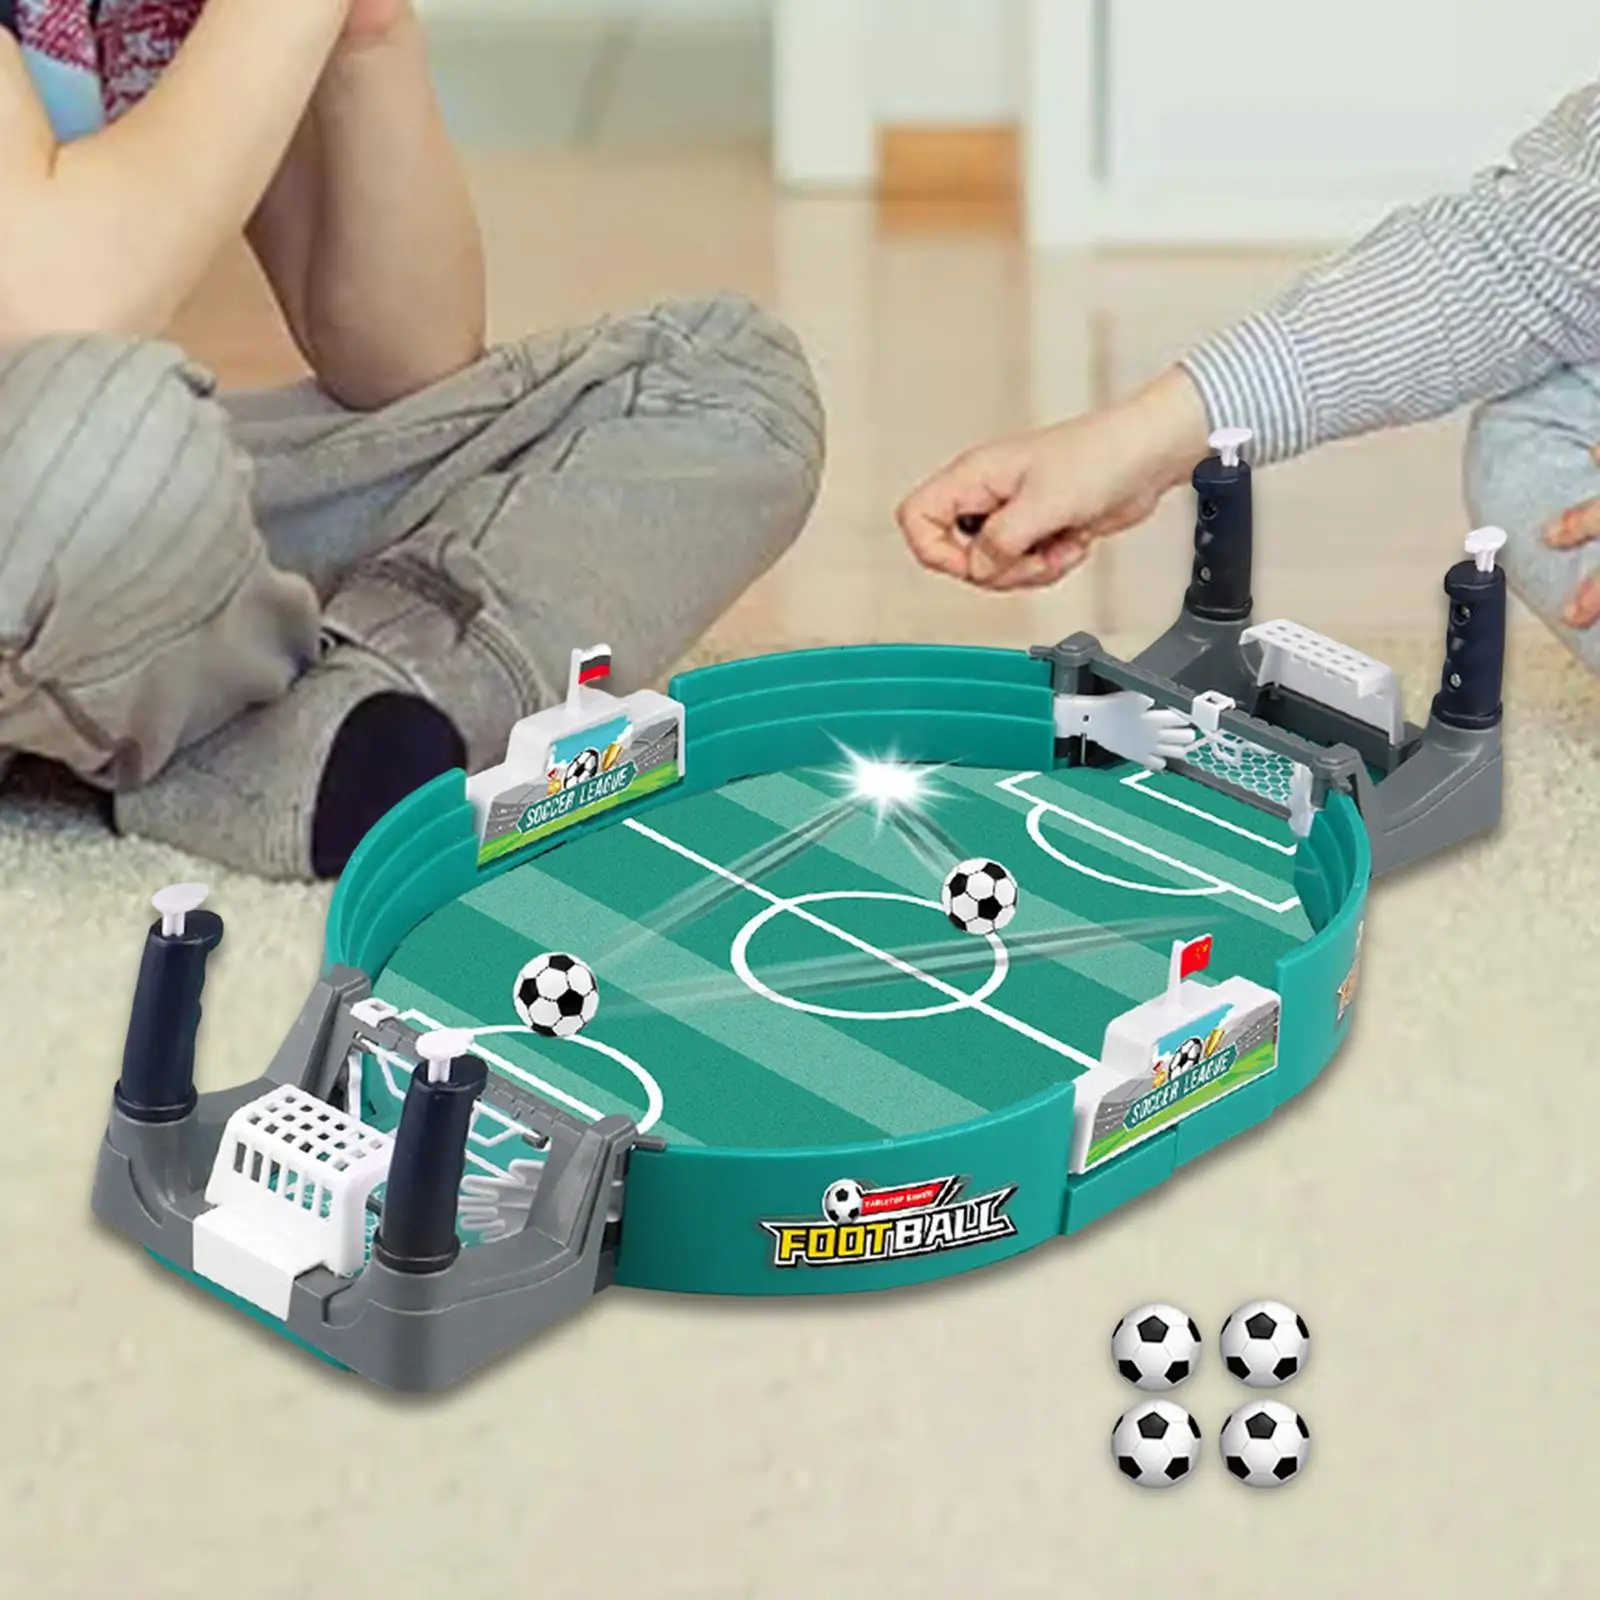 Mini Soccer Football Games Arcade Style Interactive Toy for Parties Party Rooms Kids